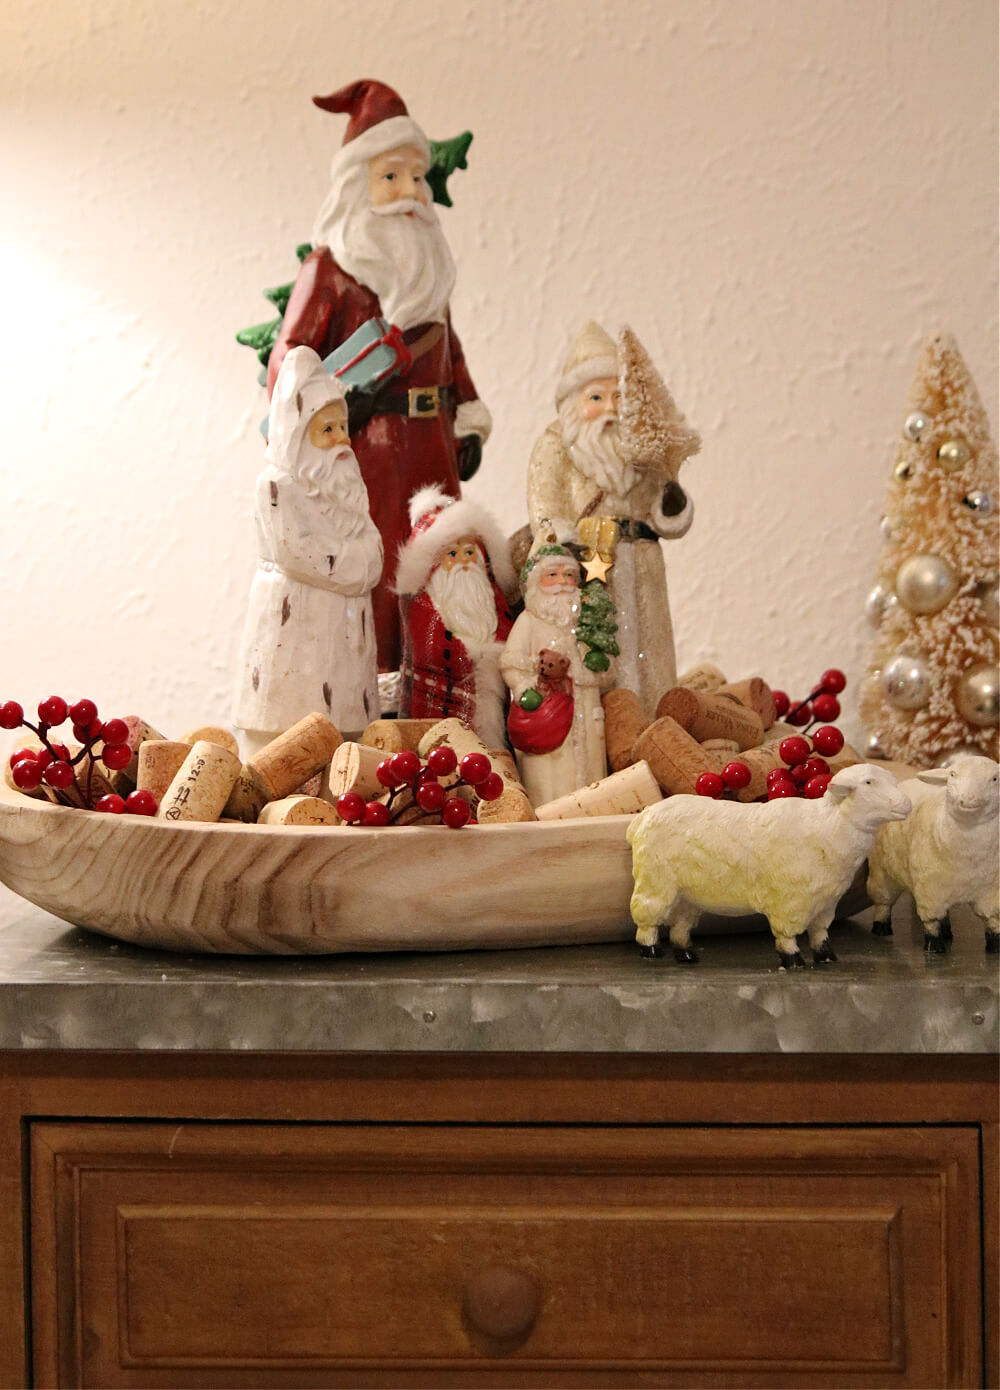 In Dining Room Santa Vignettes, Santas in a dough bowl filled with wine corks